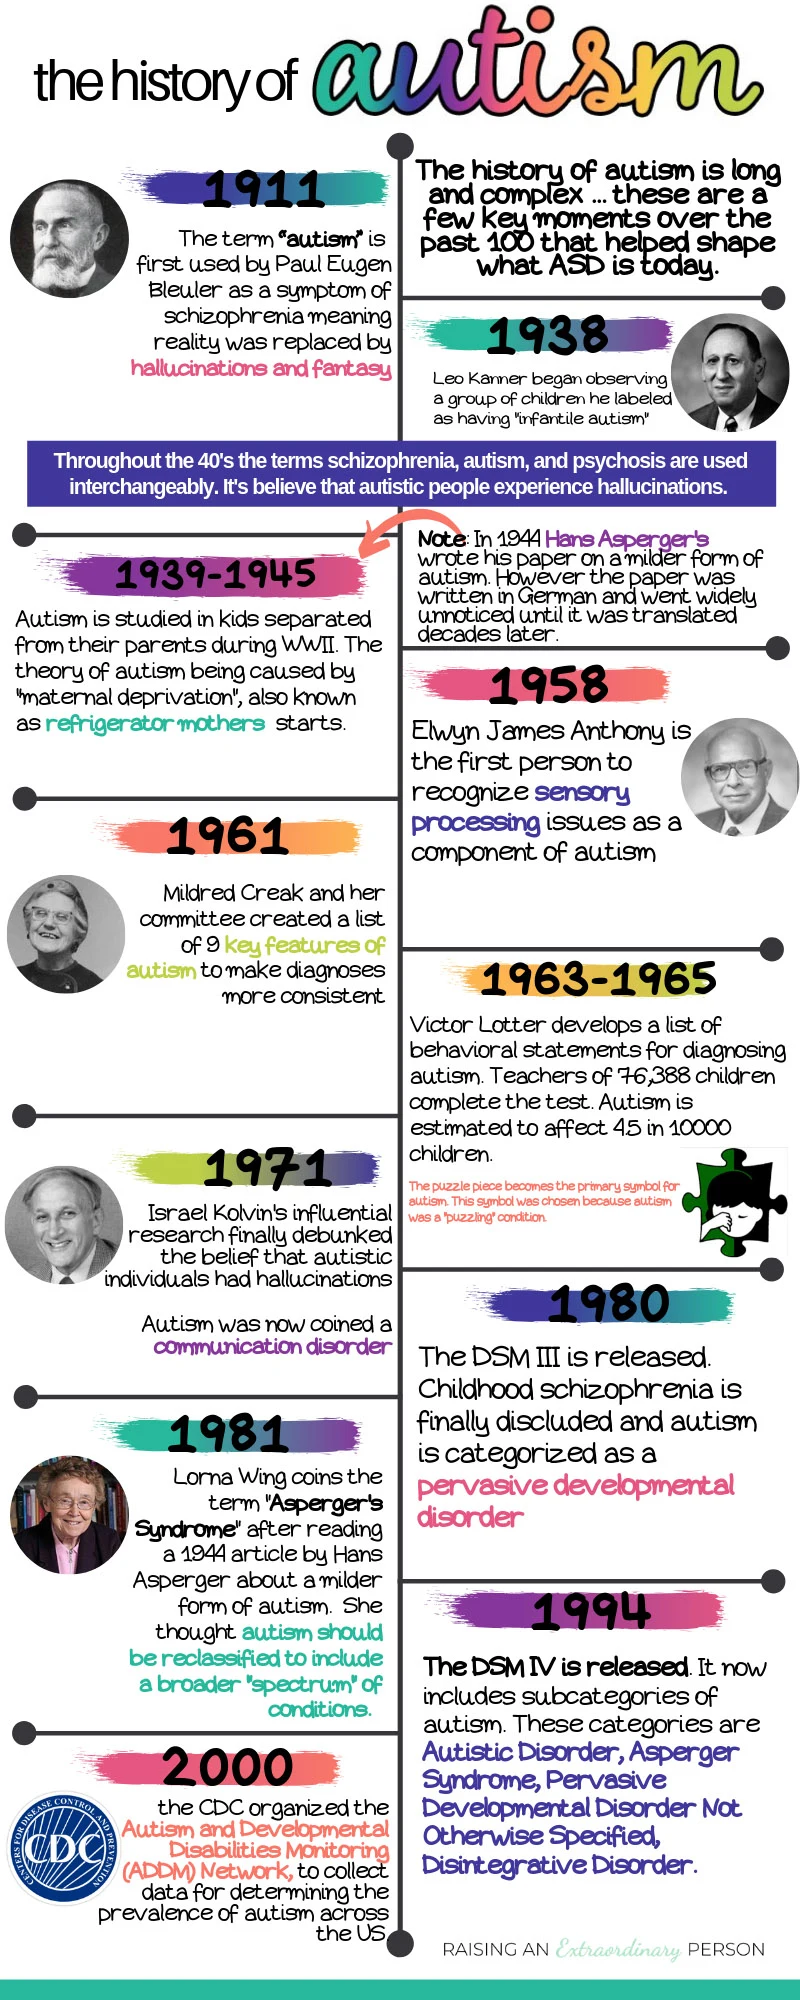 the history of autism - infographic timeline of autism